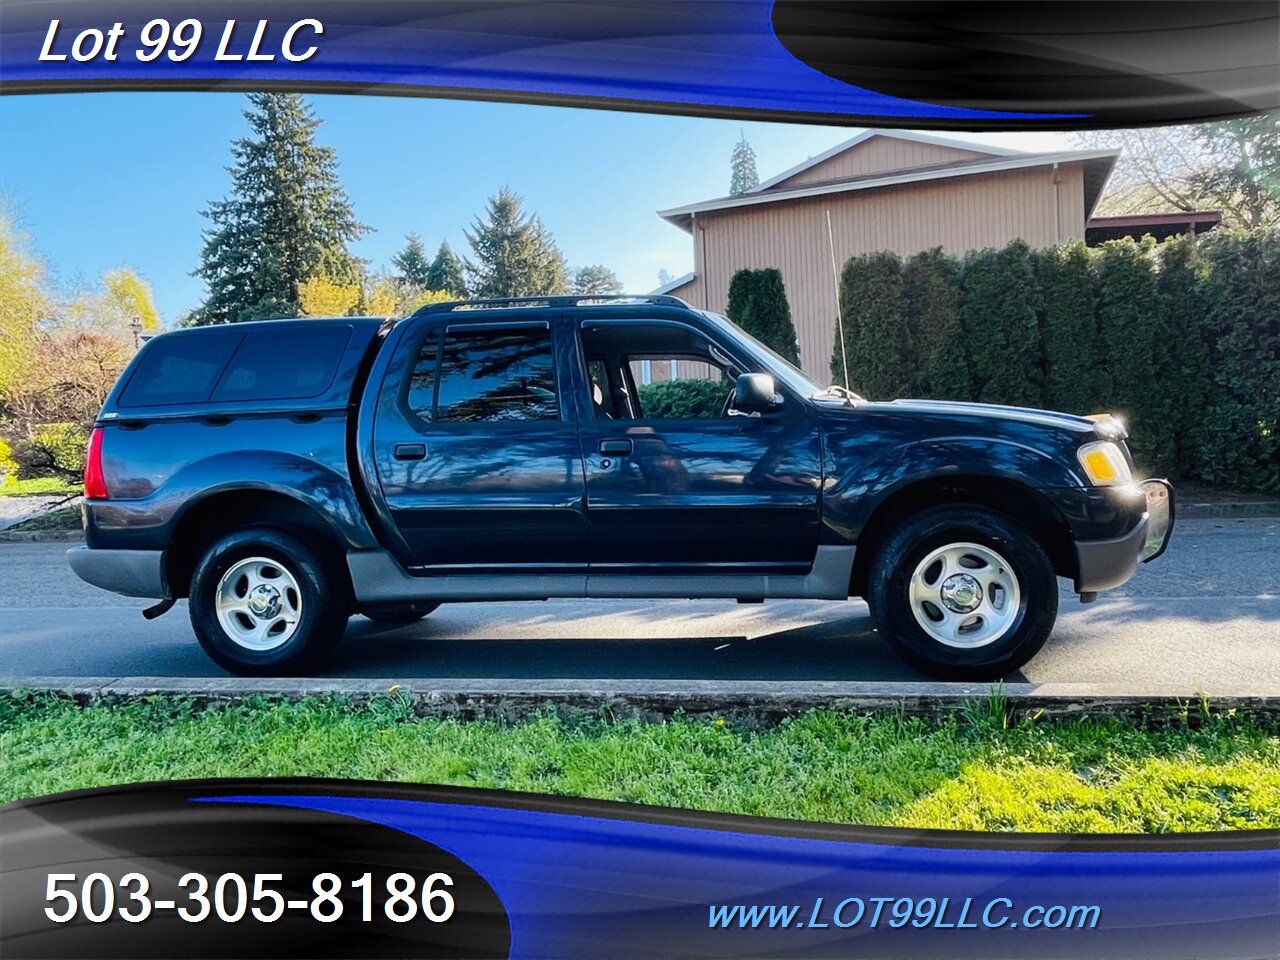 2003 Ford Explorer Sport Trac XLS 4x4  1-OWNER 117k  NEW TIRES  Canopy   - Photo 5 - Milwaukie, OR 97267